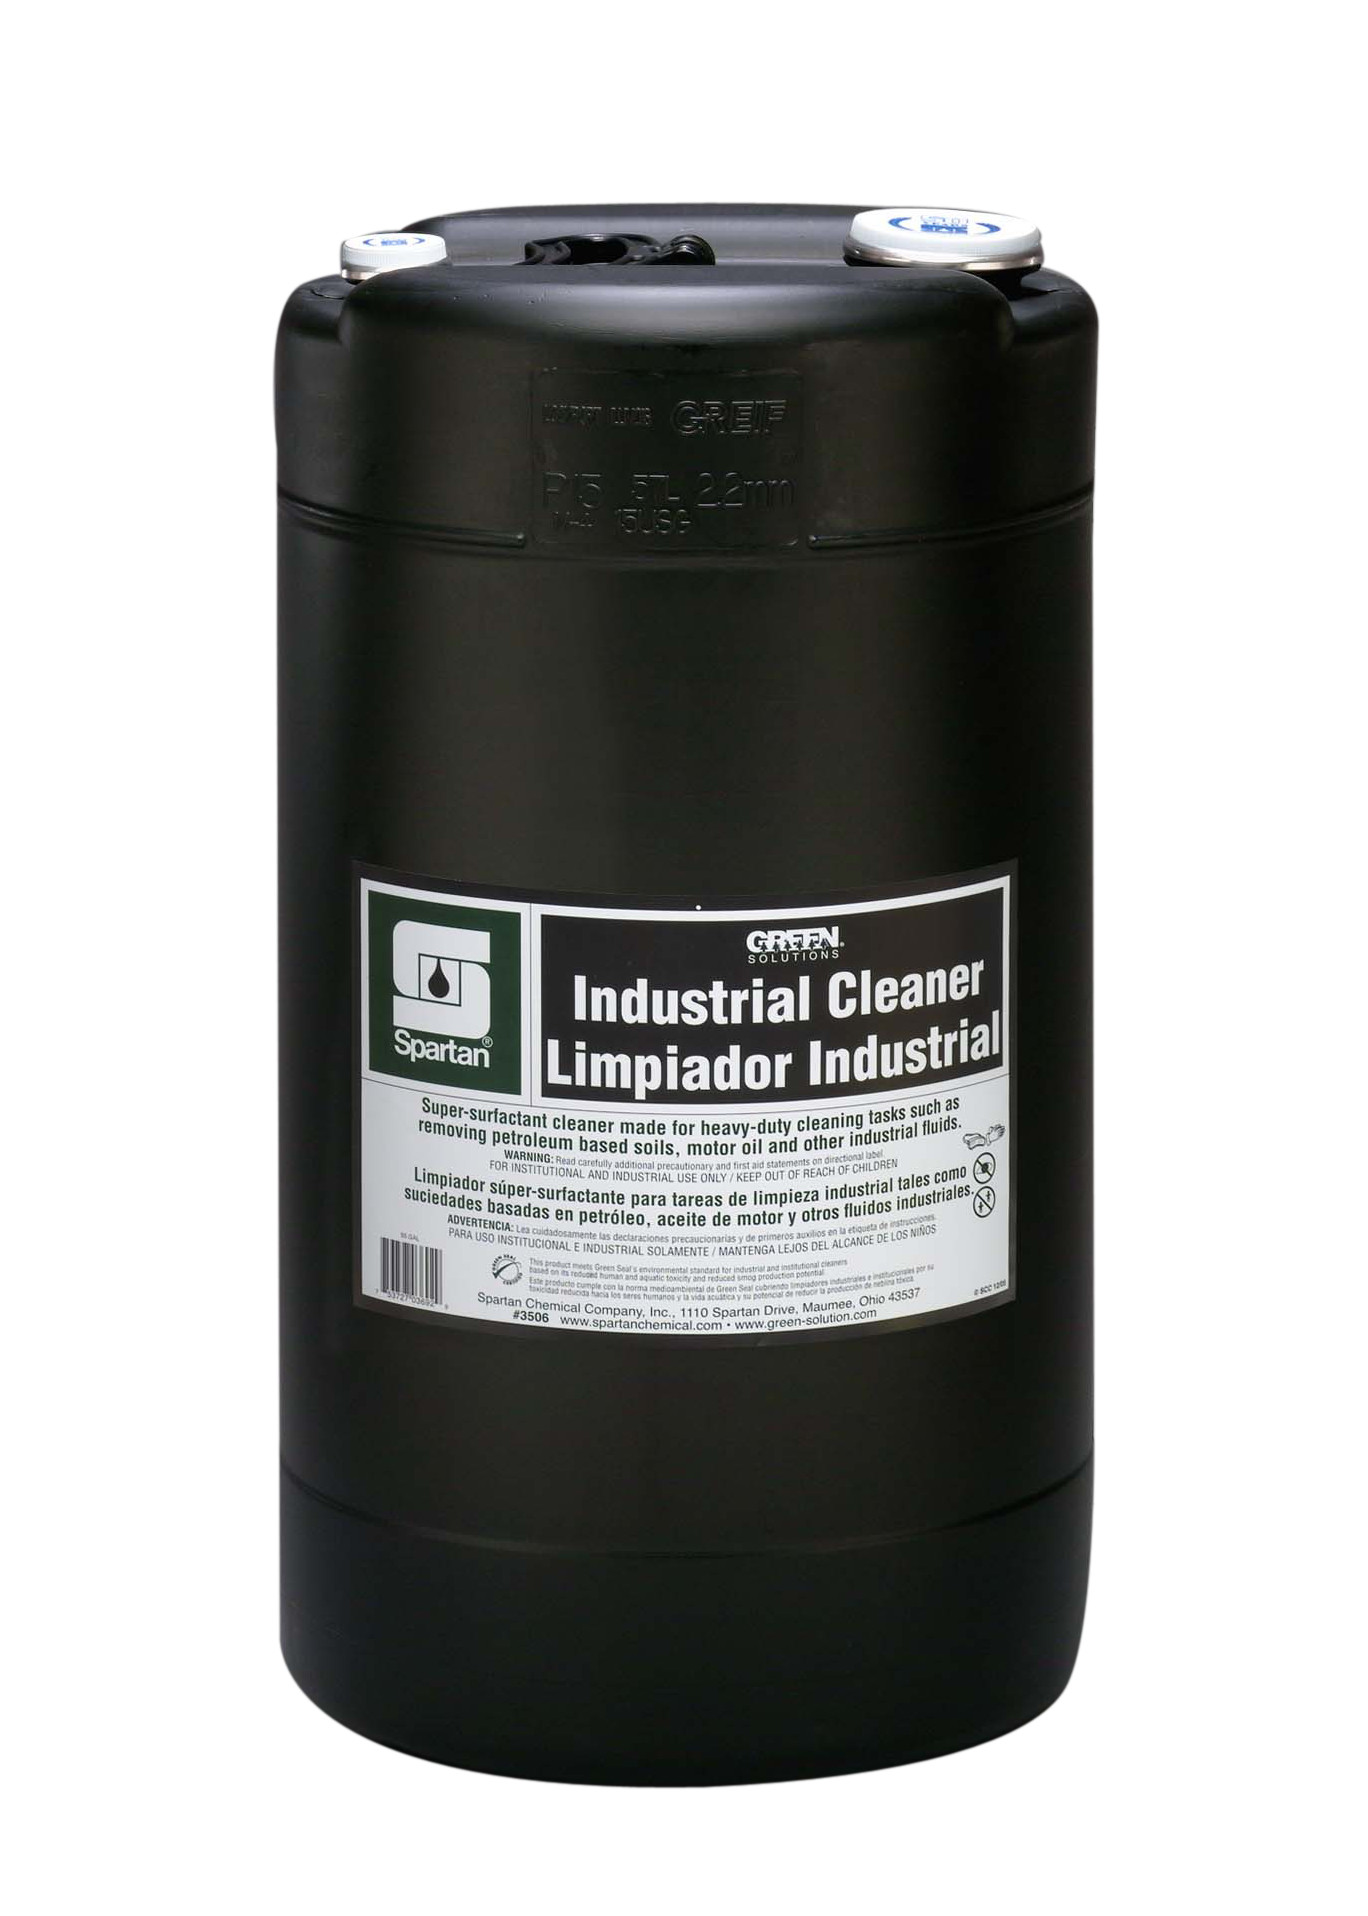 Spartan Chemical Company Green Solutions Industrial Cleaner, 15 GAL DRUM